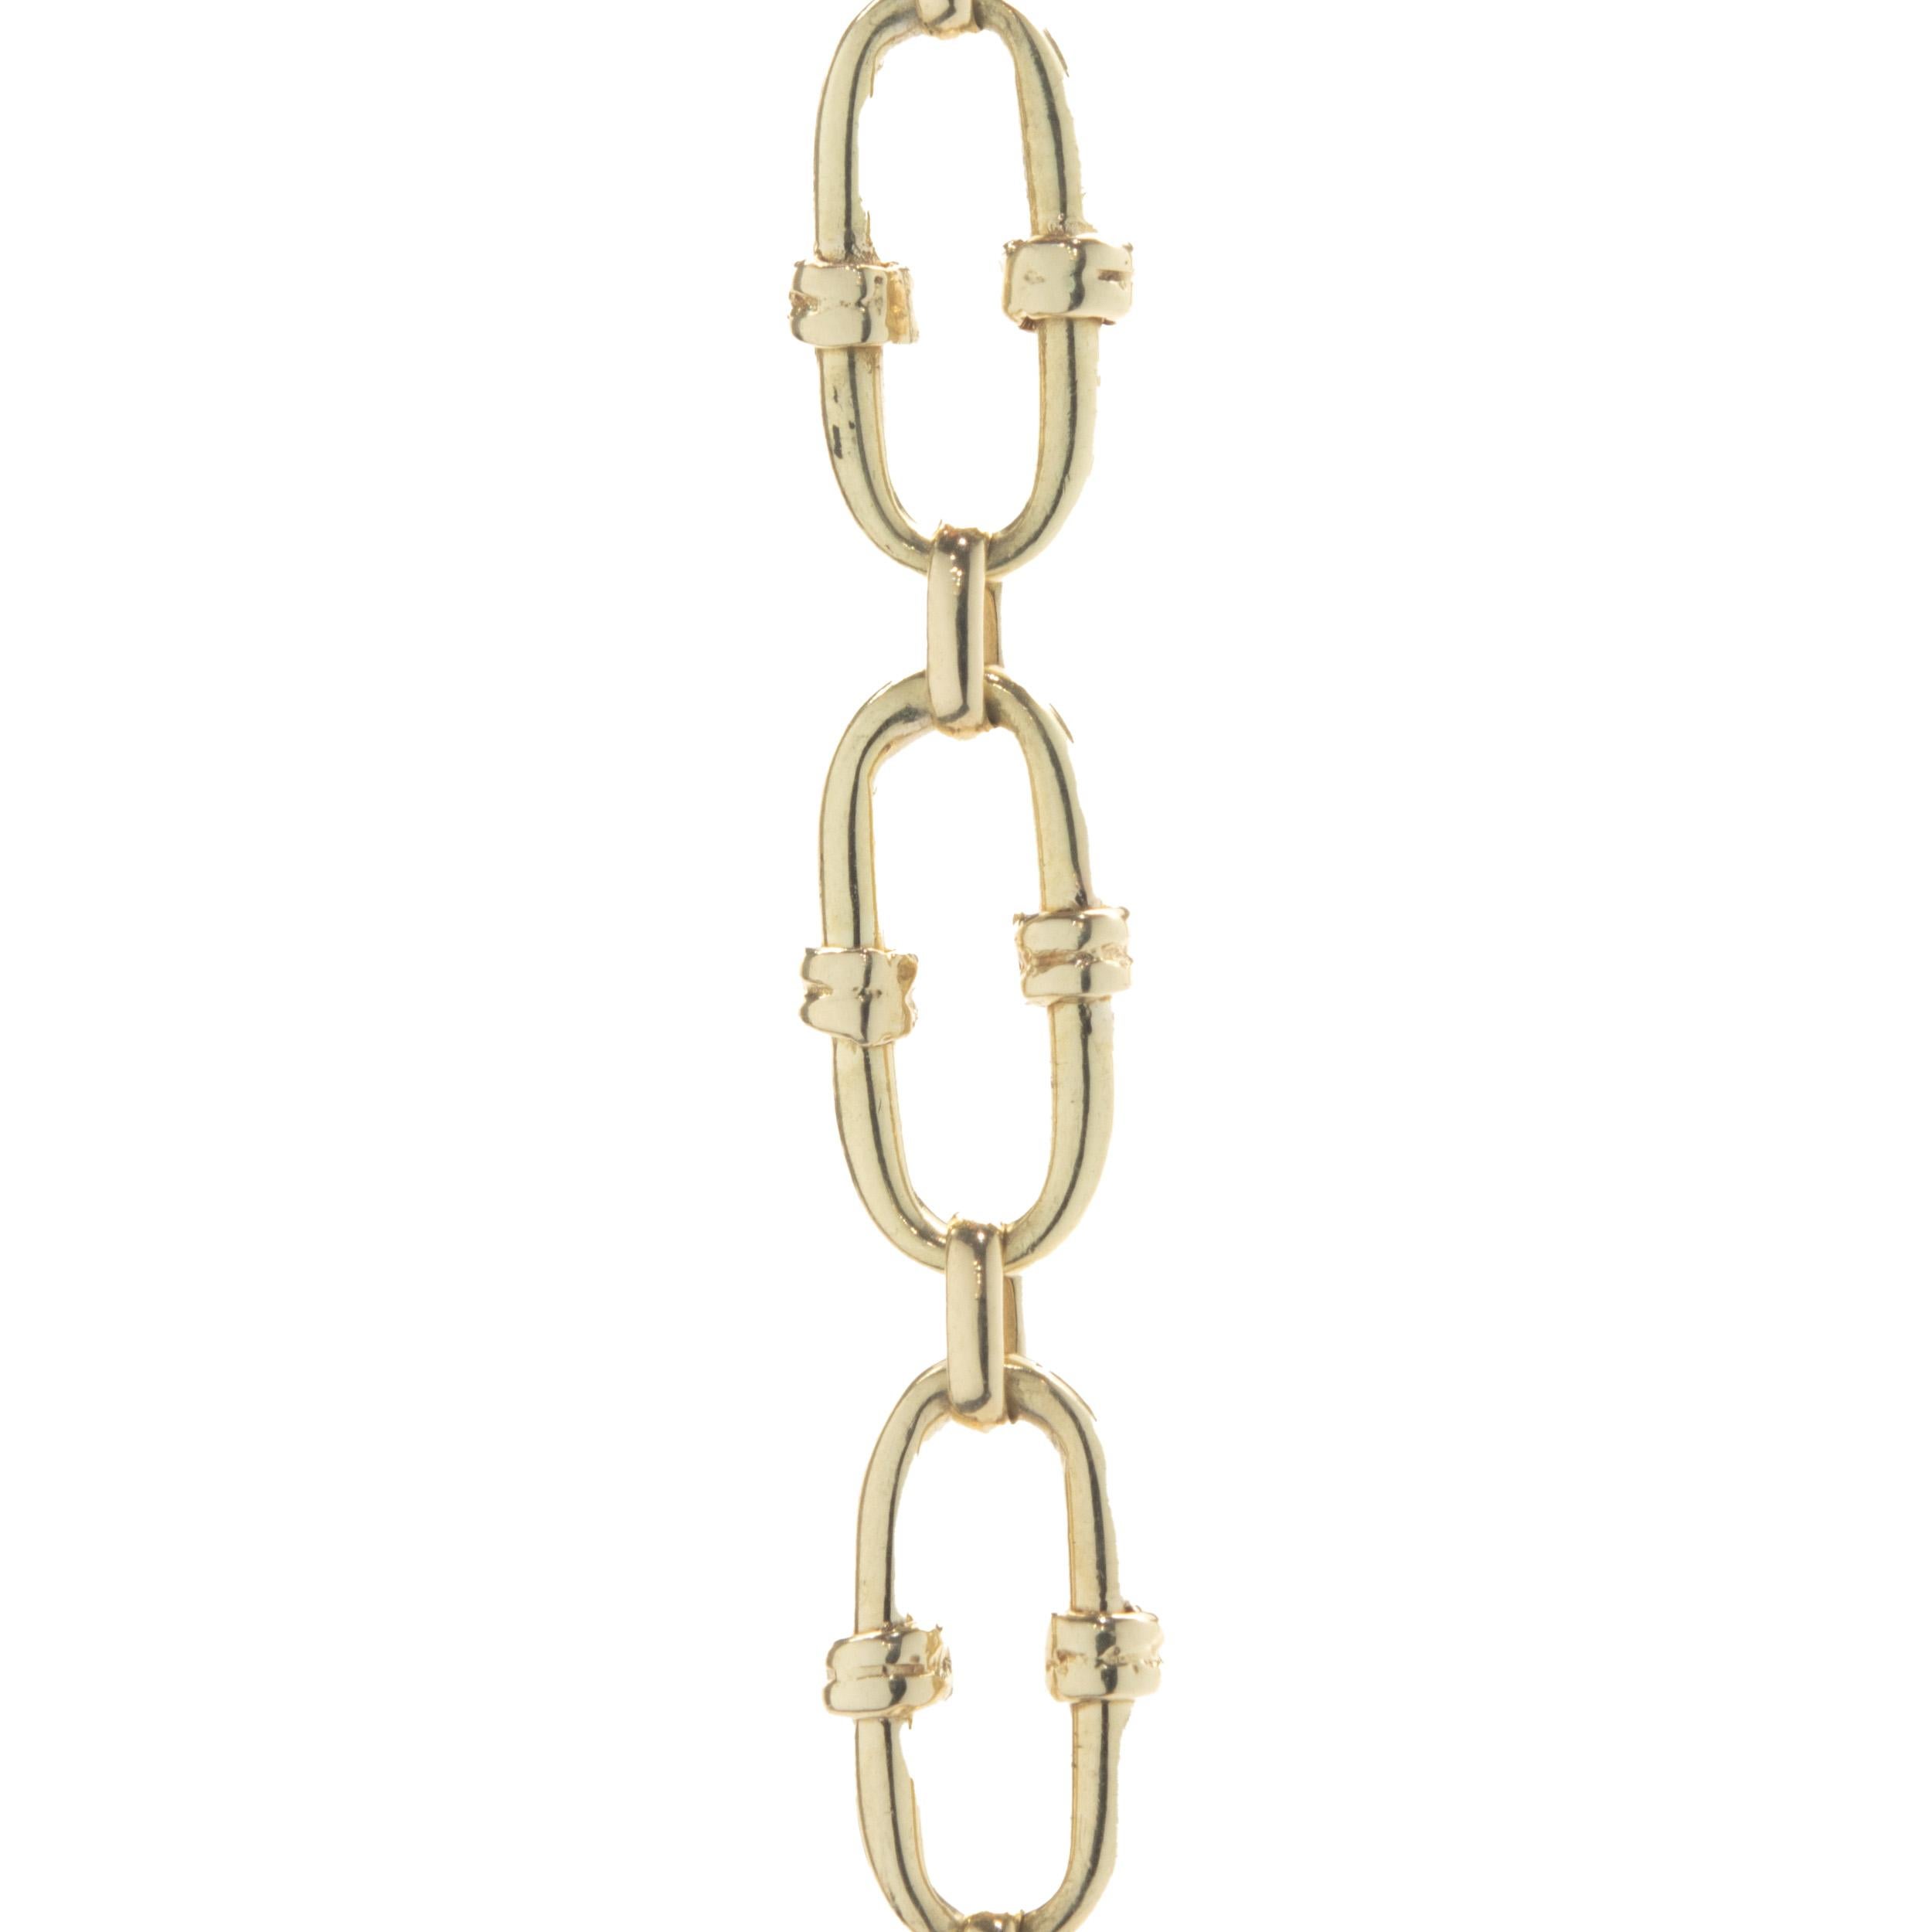 Material: 14K yellow gold
Dimensions: bracelet will fit up to a 7.5-inch wrist 
Weight: 10.20 grams